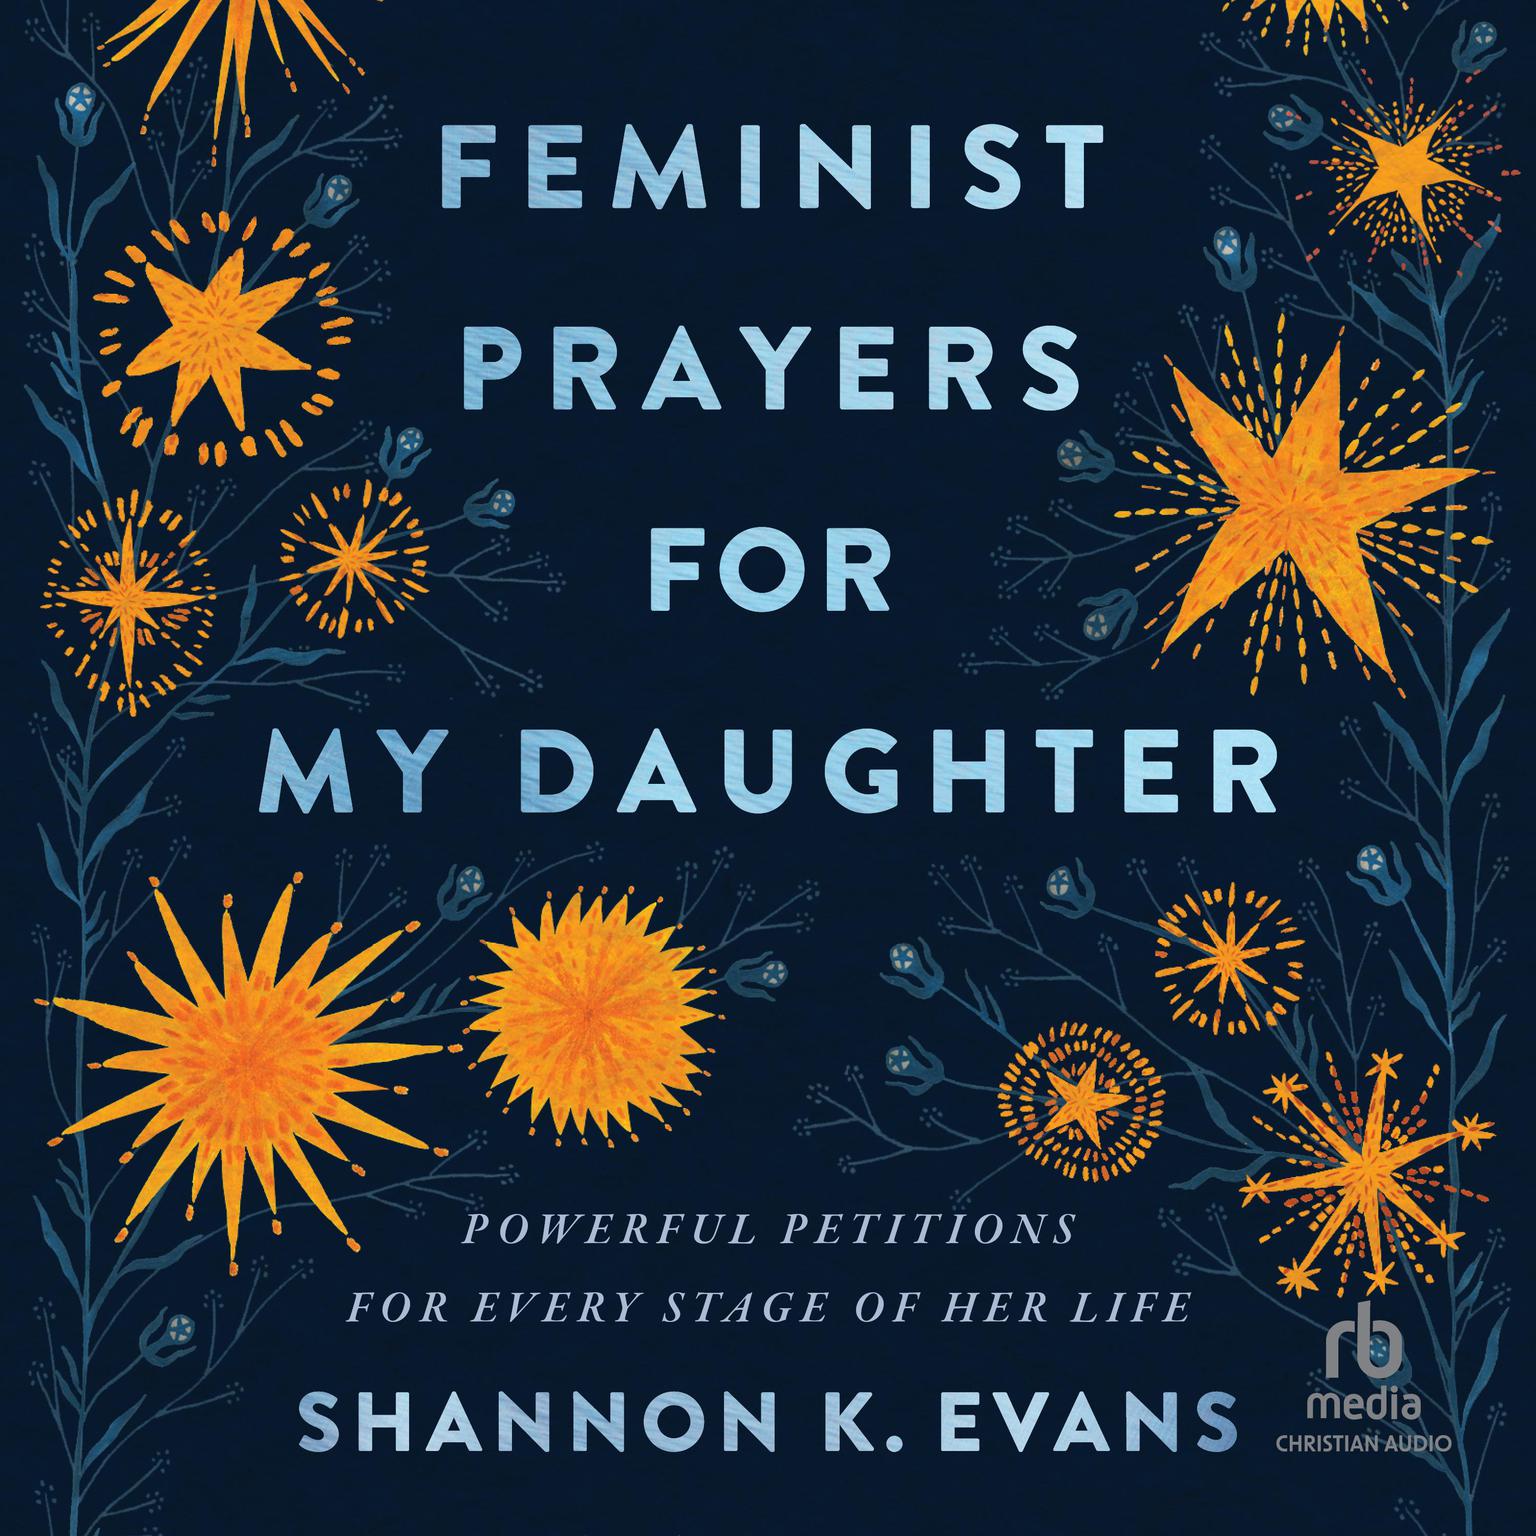 Feminist Prayers for My Daughter: Powerful Petitions for Every Stage of Her Life Audiobook, by Shannon K. Evans